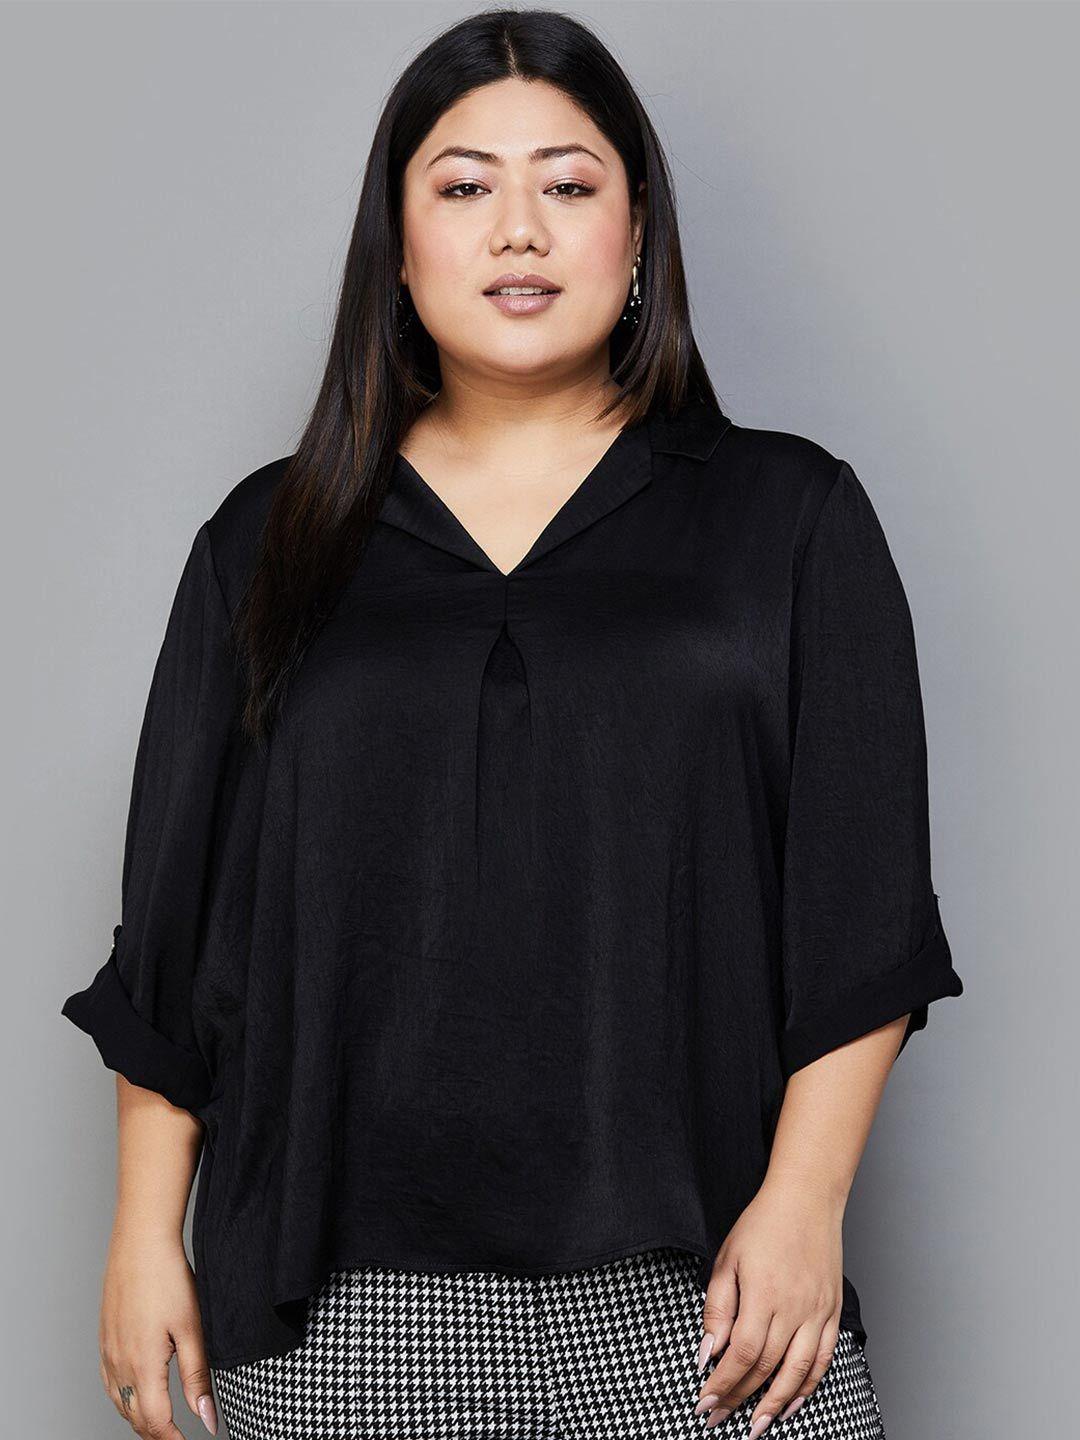 nexus by lifestyle black roll-up sleeves top